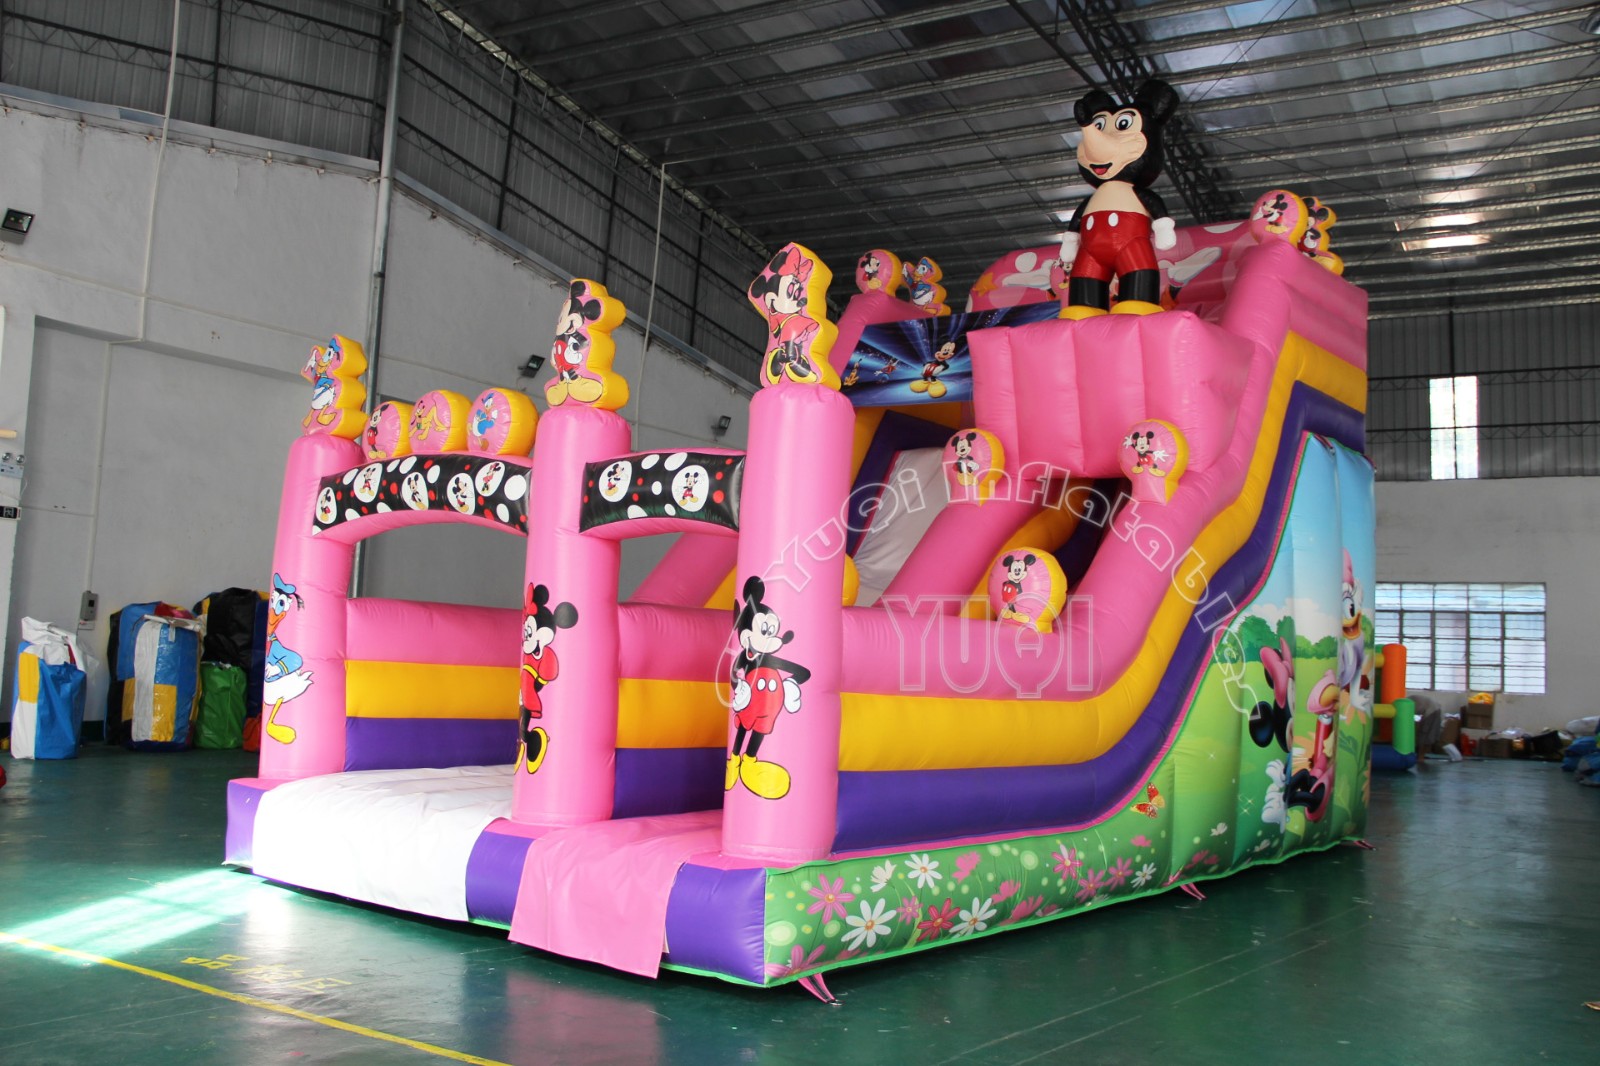 YUQI-Yq23 Hot Sale Mickeyy Mouse Giant Inflatable Water Slide